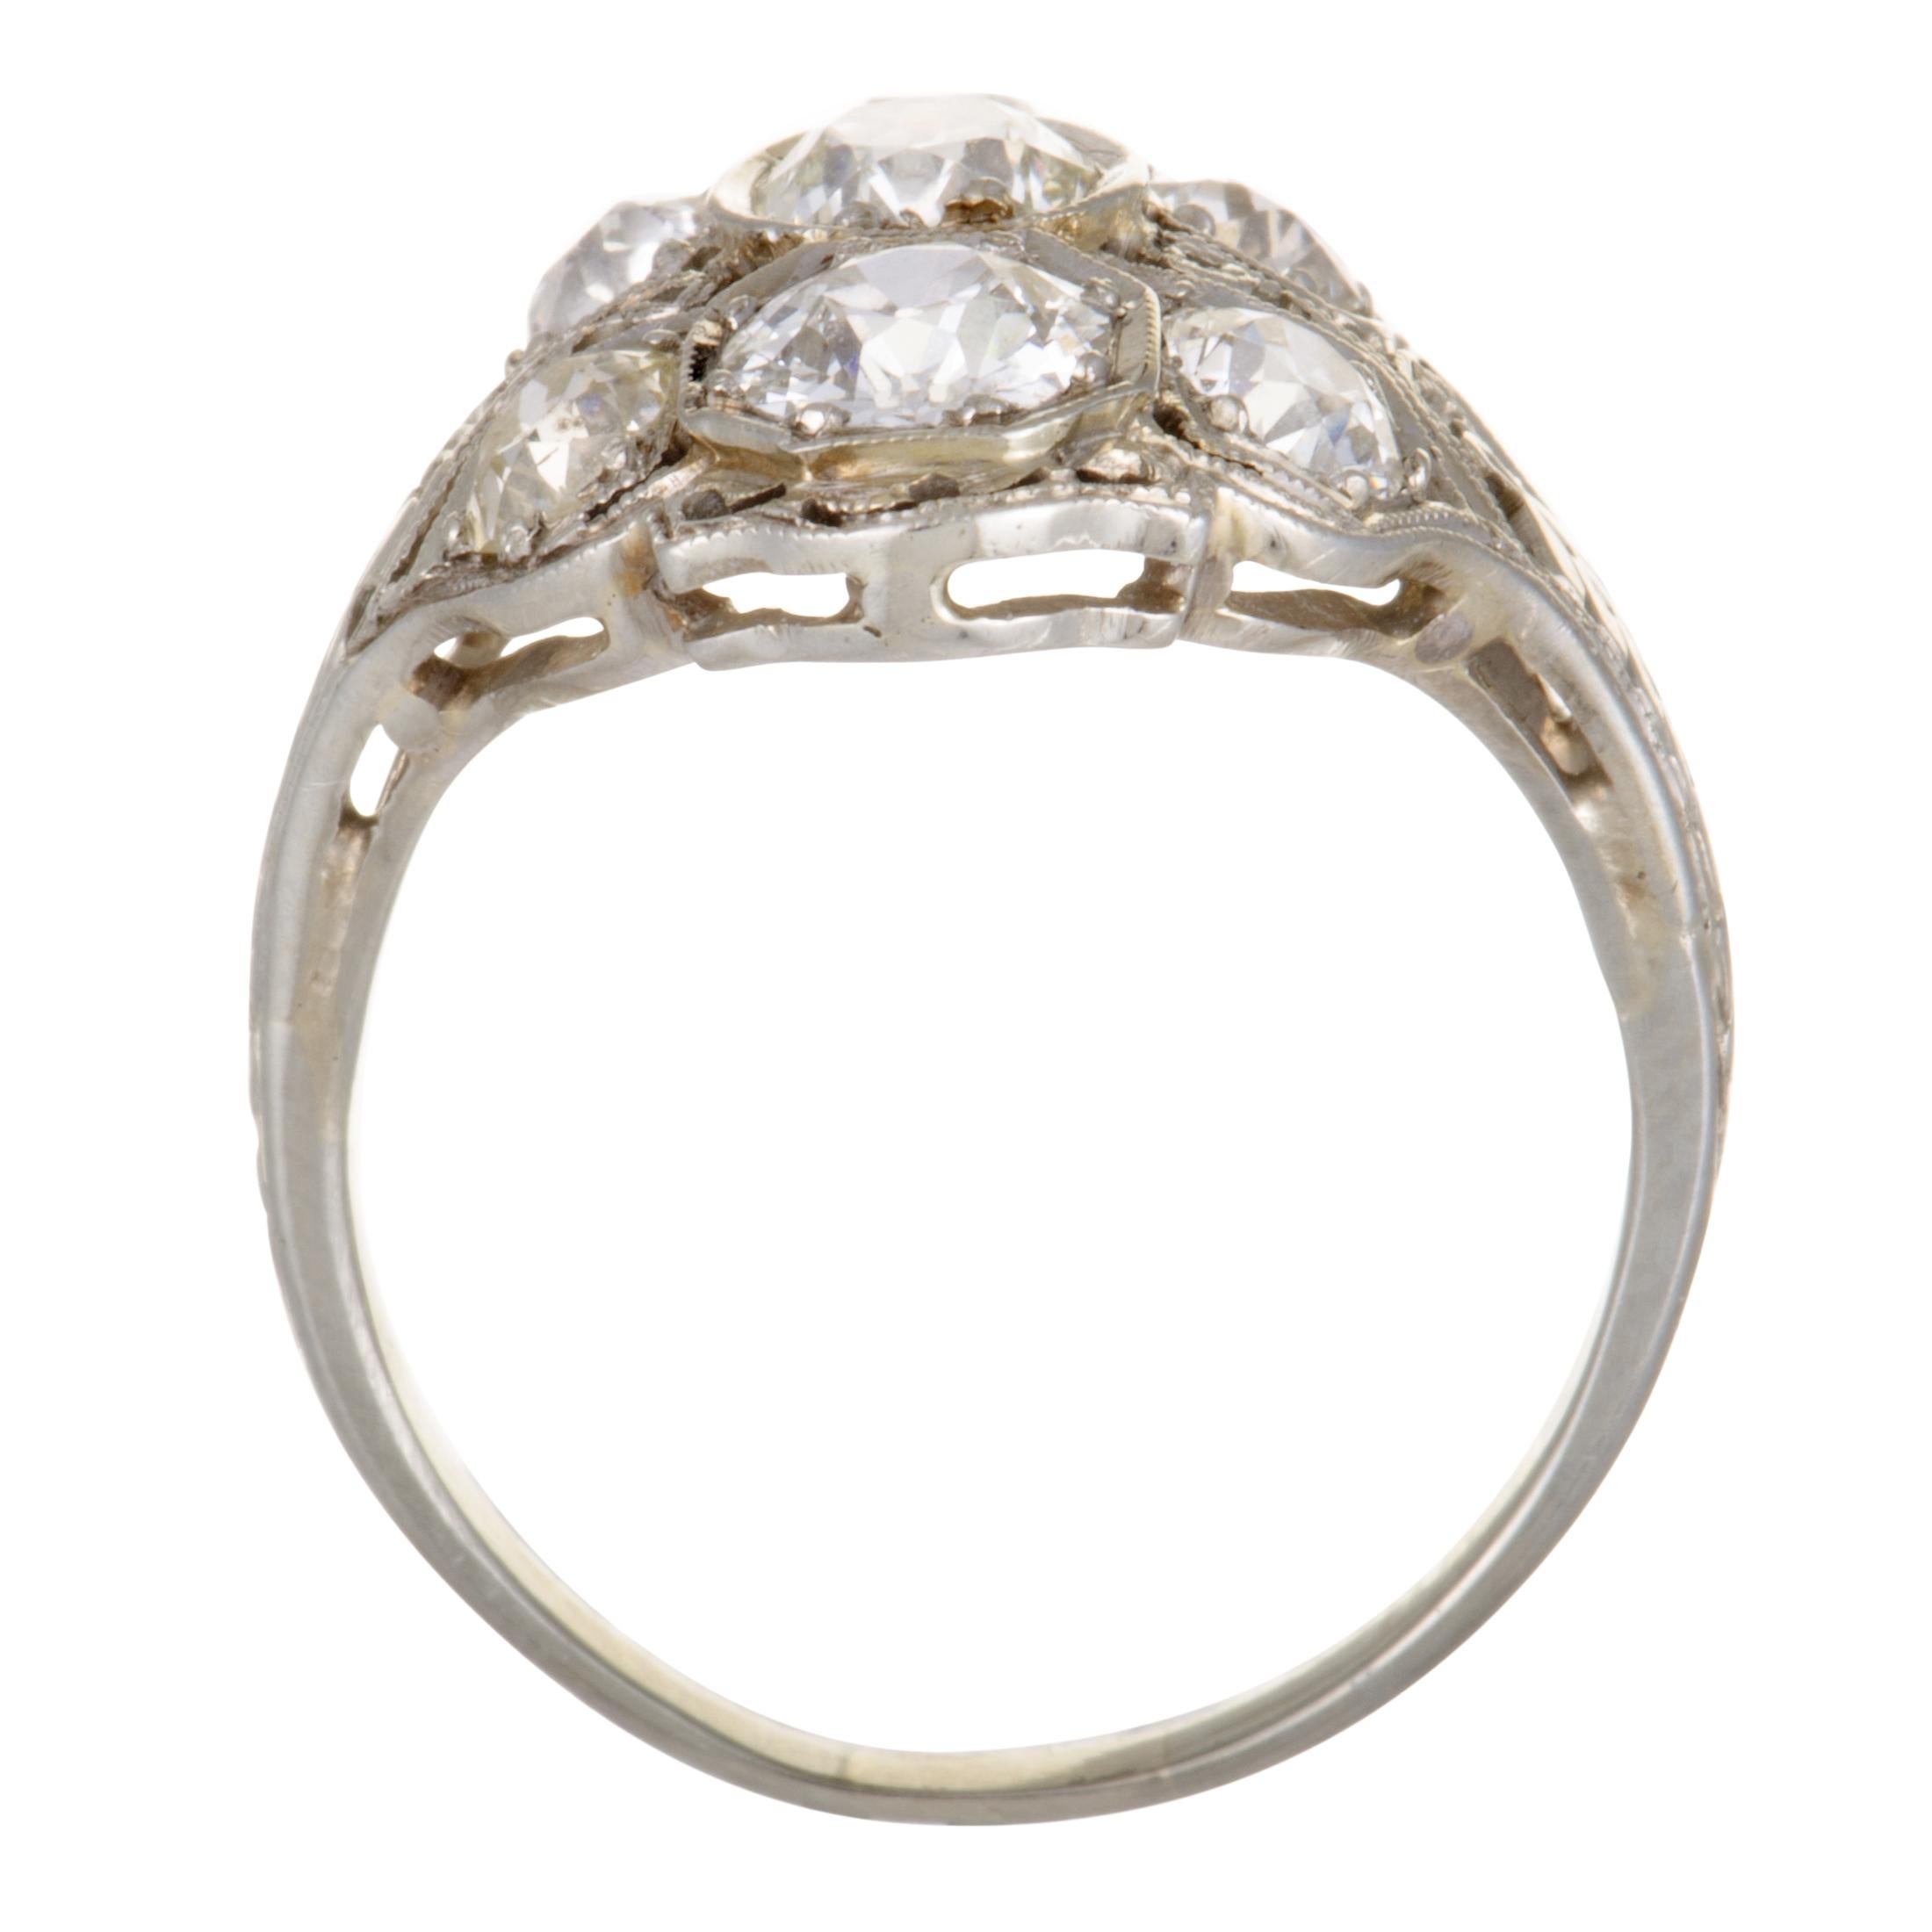 Boasting the ever-enticing filigree design, this exceptional antique ring will add a compelling touch of timeless extravagance to your ensemble. The ring is crafted from platinum and set with expertly cut diamond stones that weigh approximately 2.25